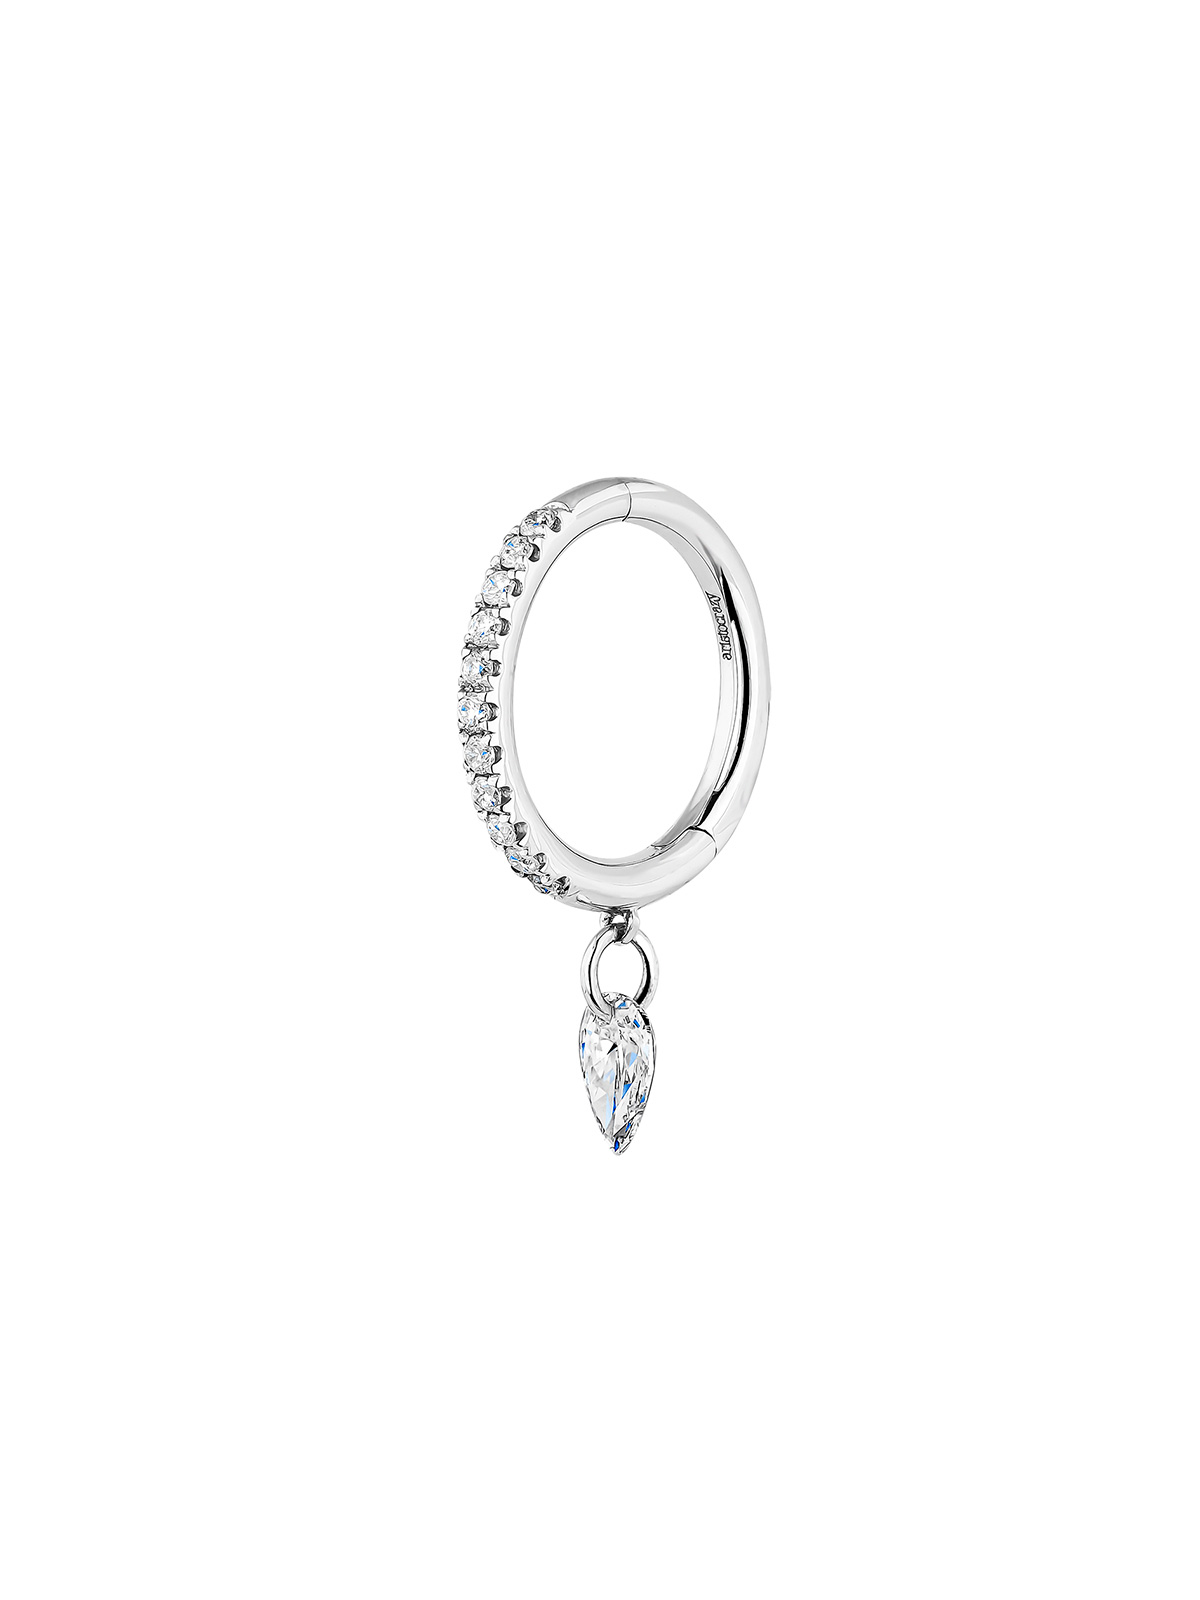 Individual small hoop earring made of 18K white gold with diamonds.